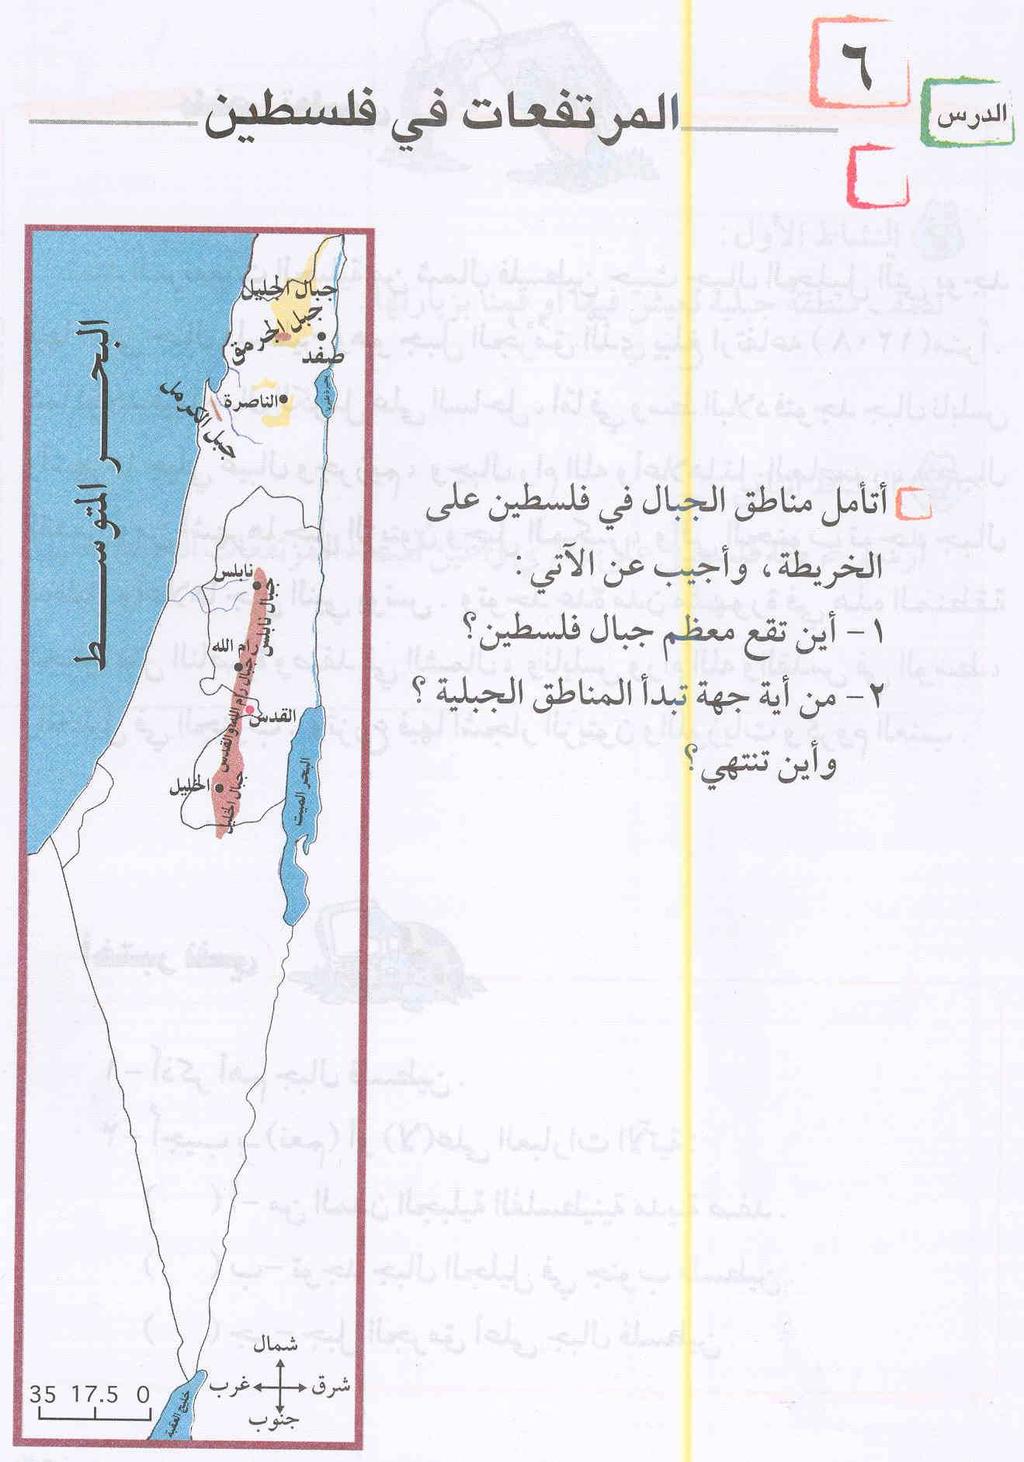 Lesson 6: Heights in Palestine National Education, Grade 4, Part 1 (2003) p.